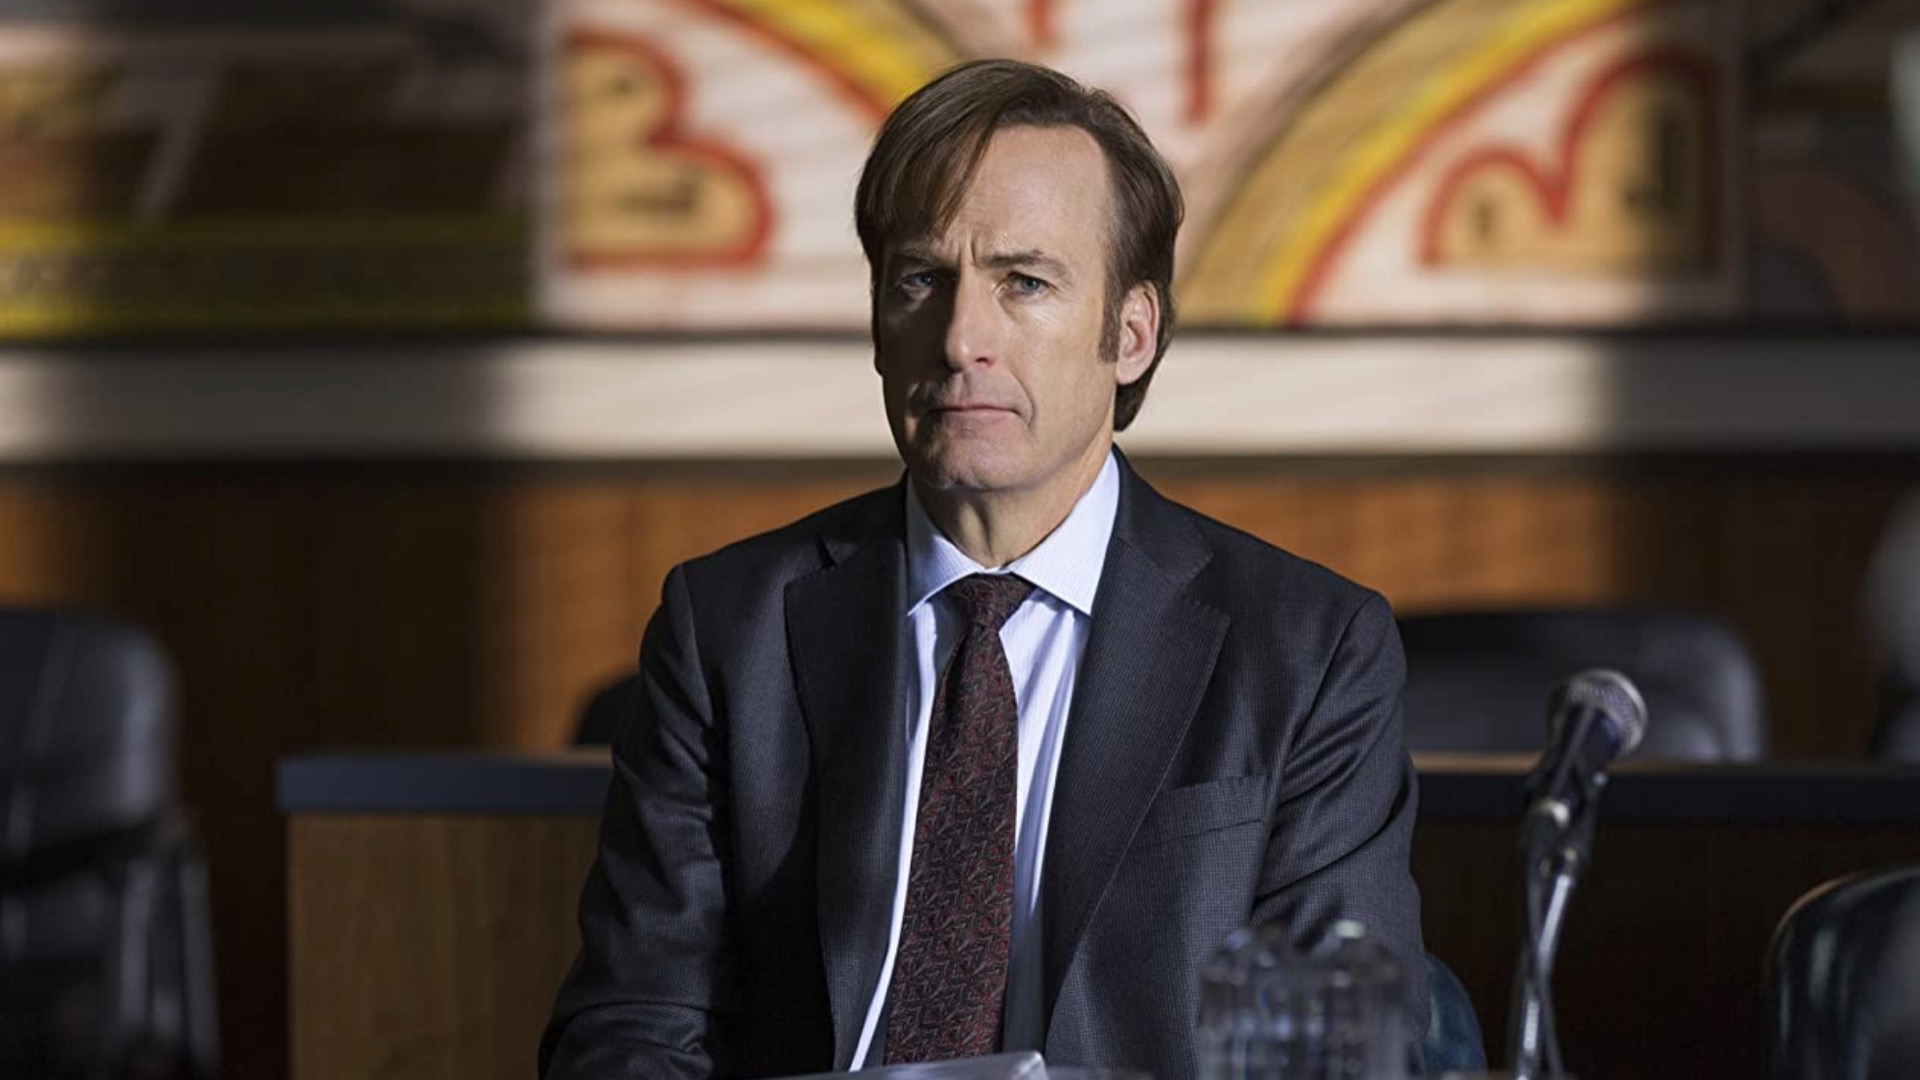 Better Call Saul season 6 release schedule: When does episode 5 air on AMC and Netflix?